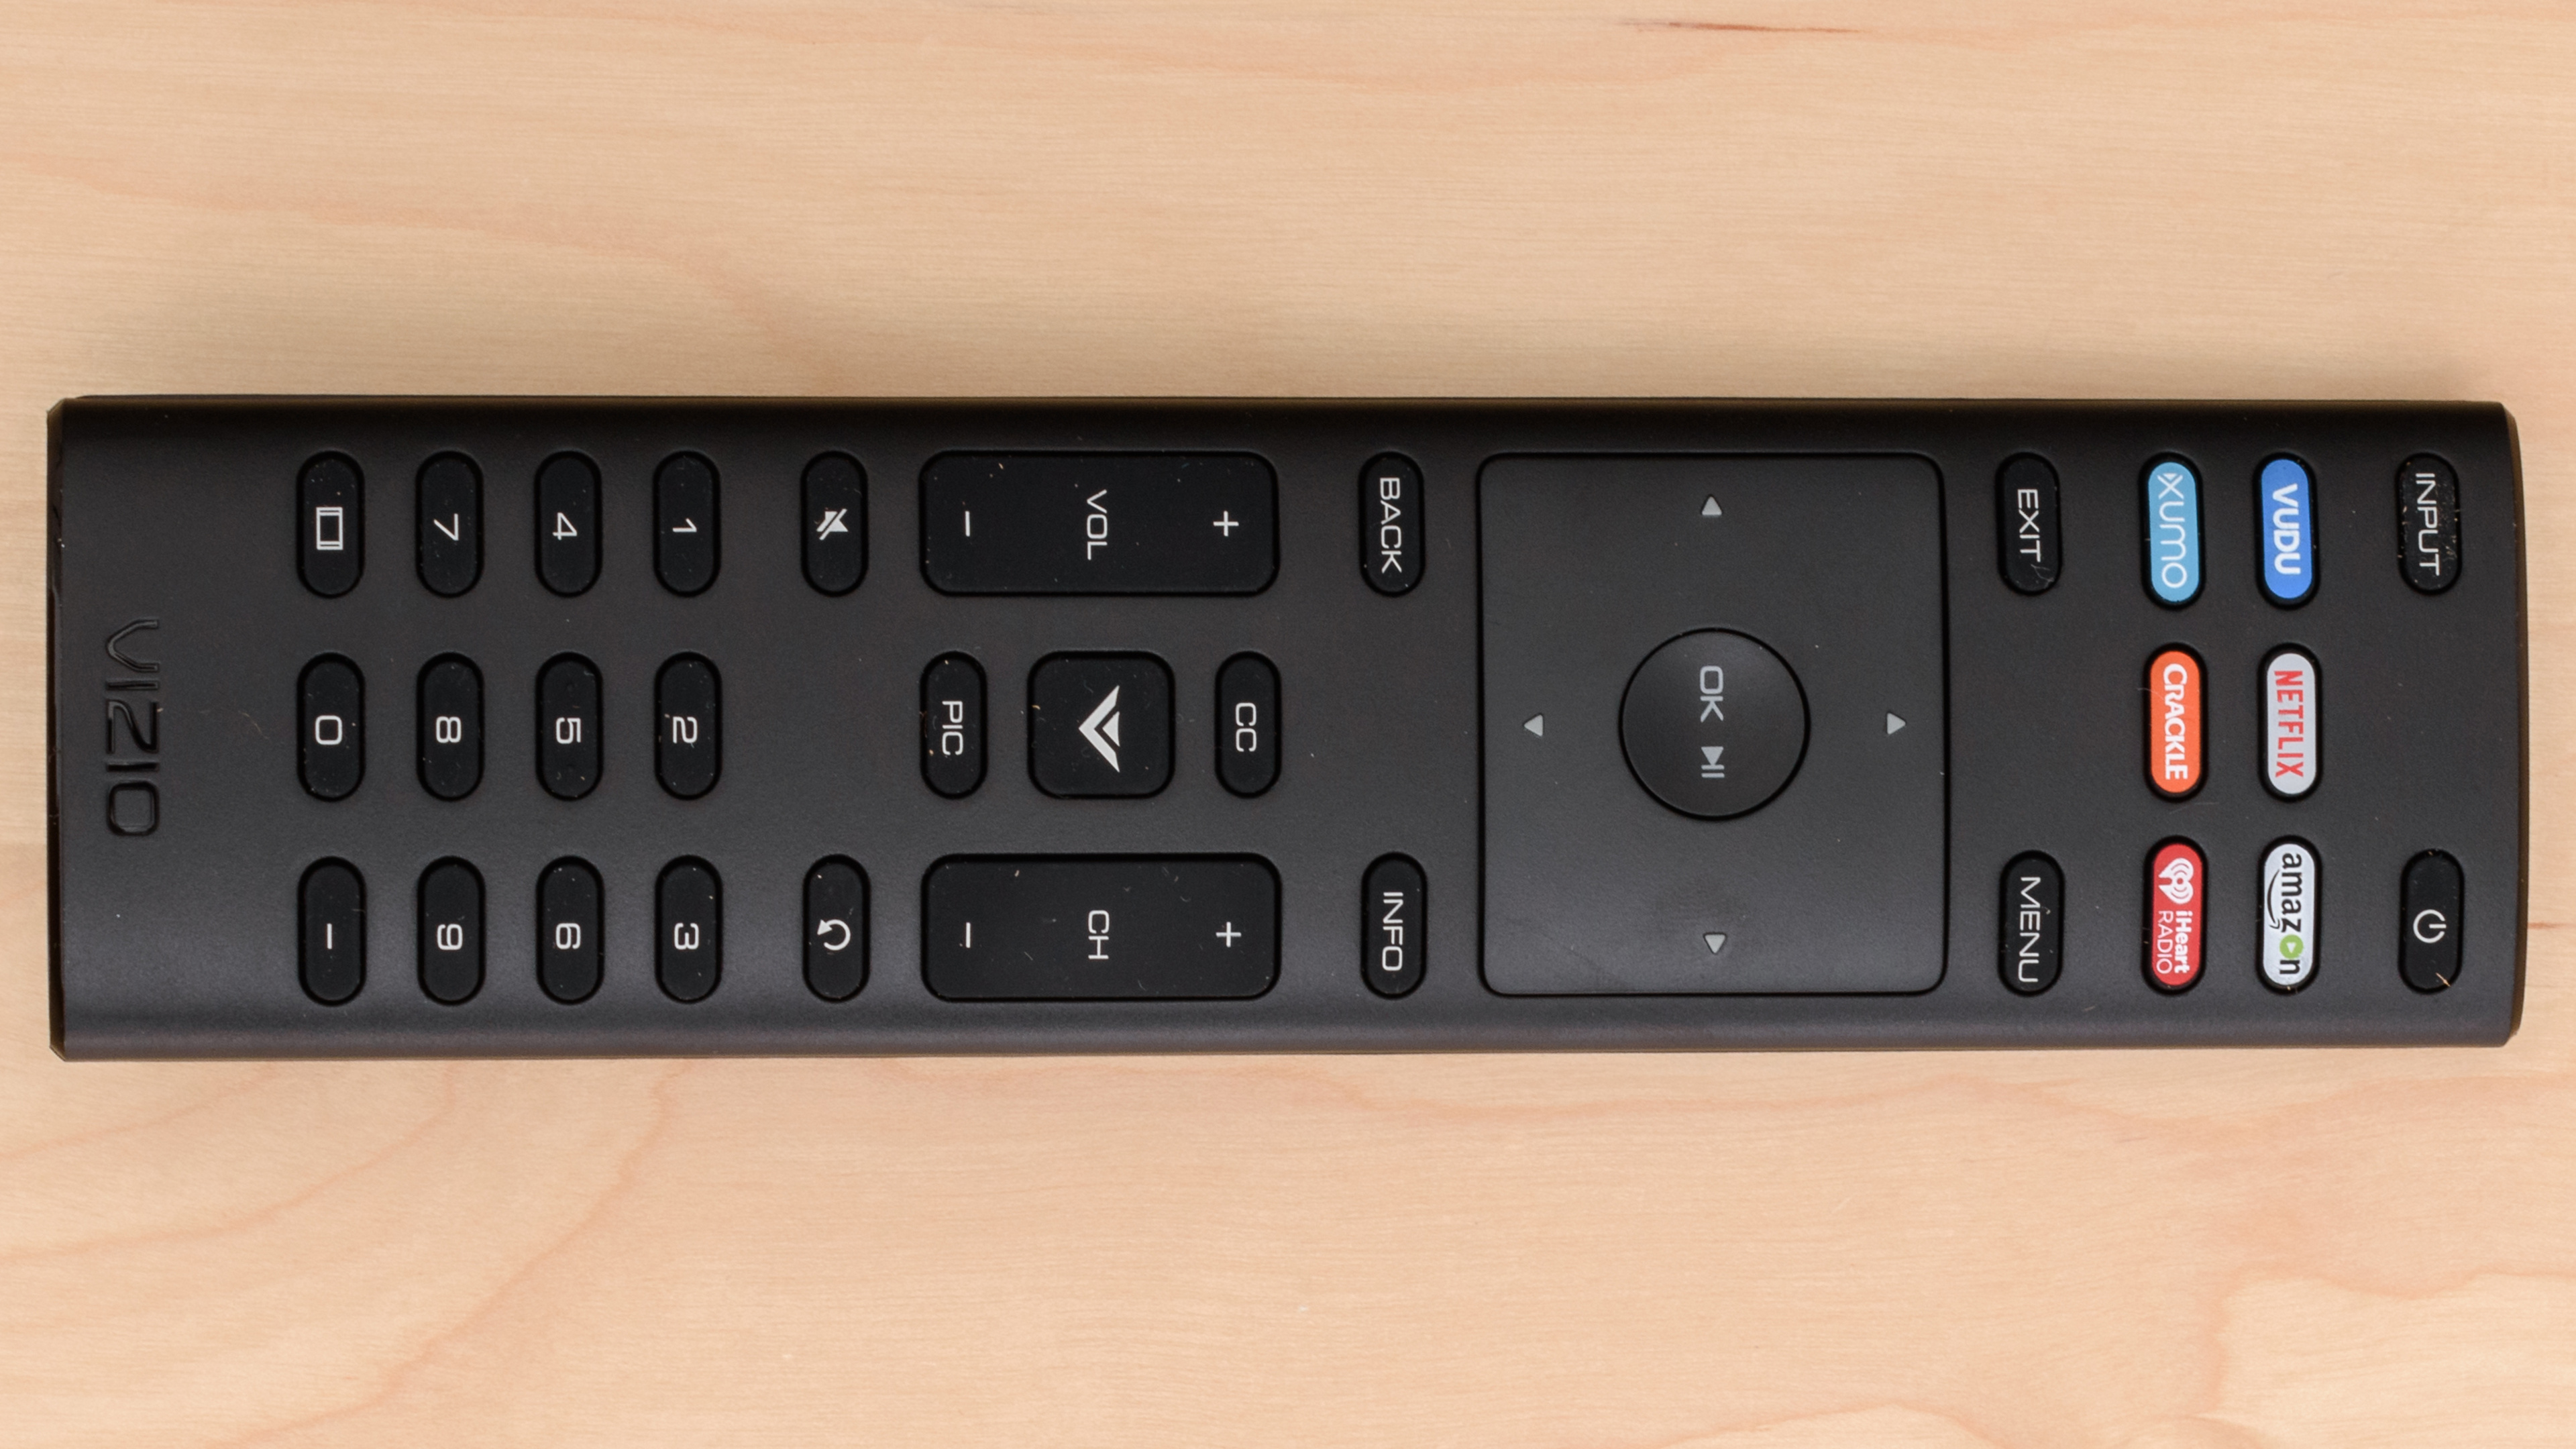 How to control vizio tv without remote or wifi